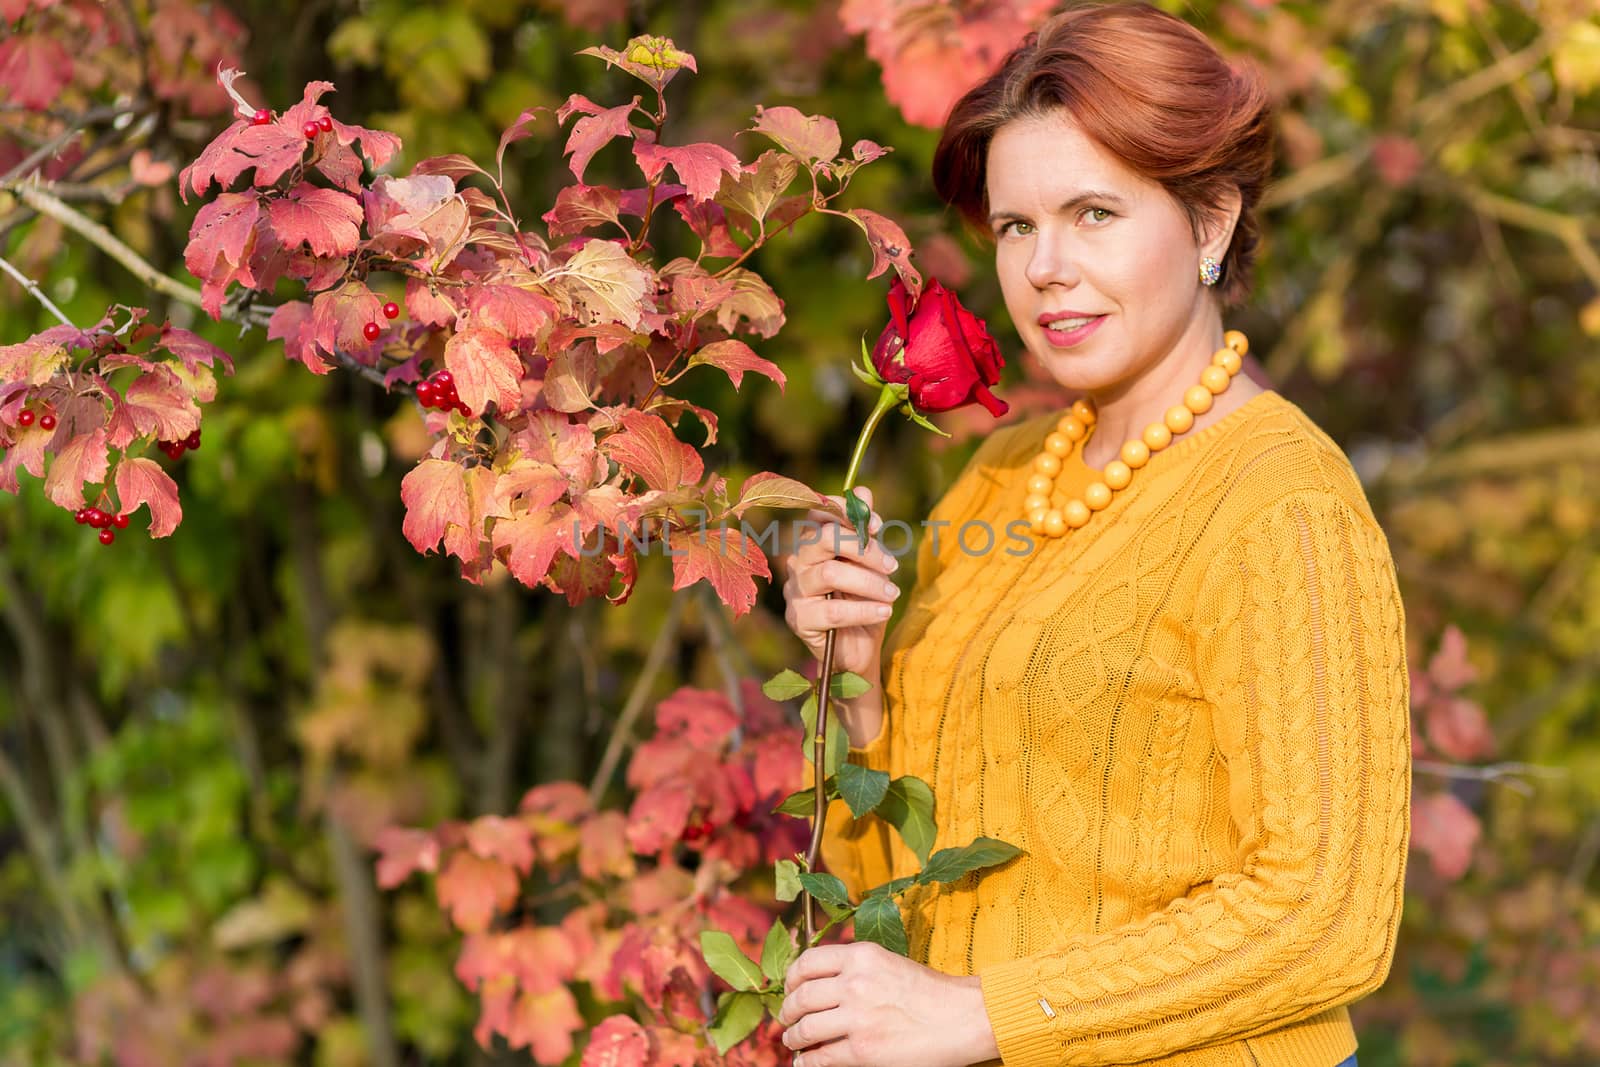 .Portrait of beautiful 30 year old woman holding rose and standing near Red foliage on a viburnum Bush in autumn park